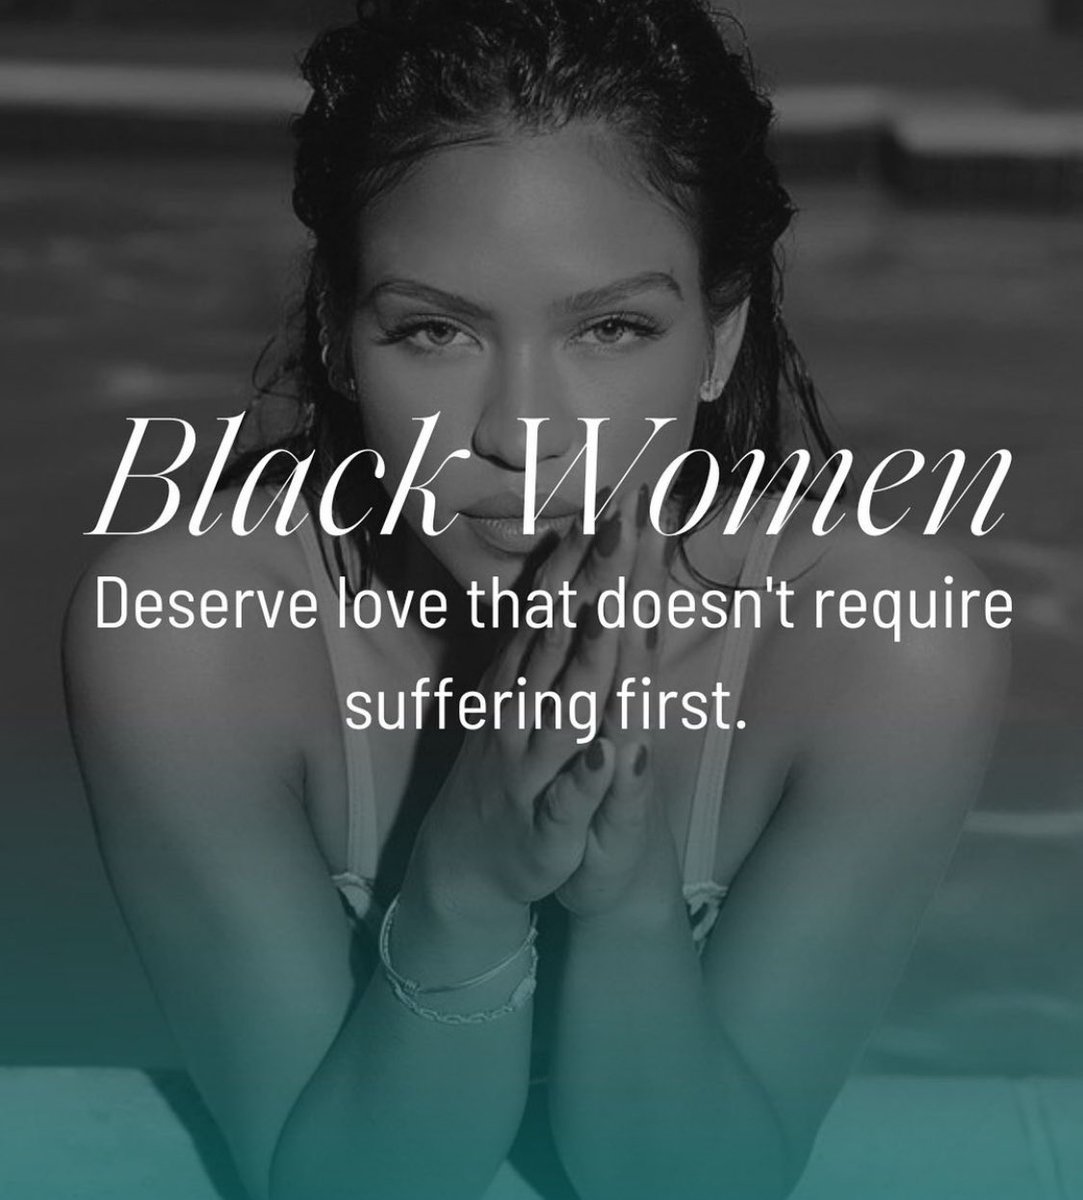 We are praying for Cassie Ventura and every survivor of sexual abuse and domestic violence. Black women deserve to experience love without the burden of suffering. If anyone is in need of assistance please dial the National Domestic Violence Hotline at 800-799-7233.